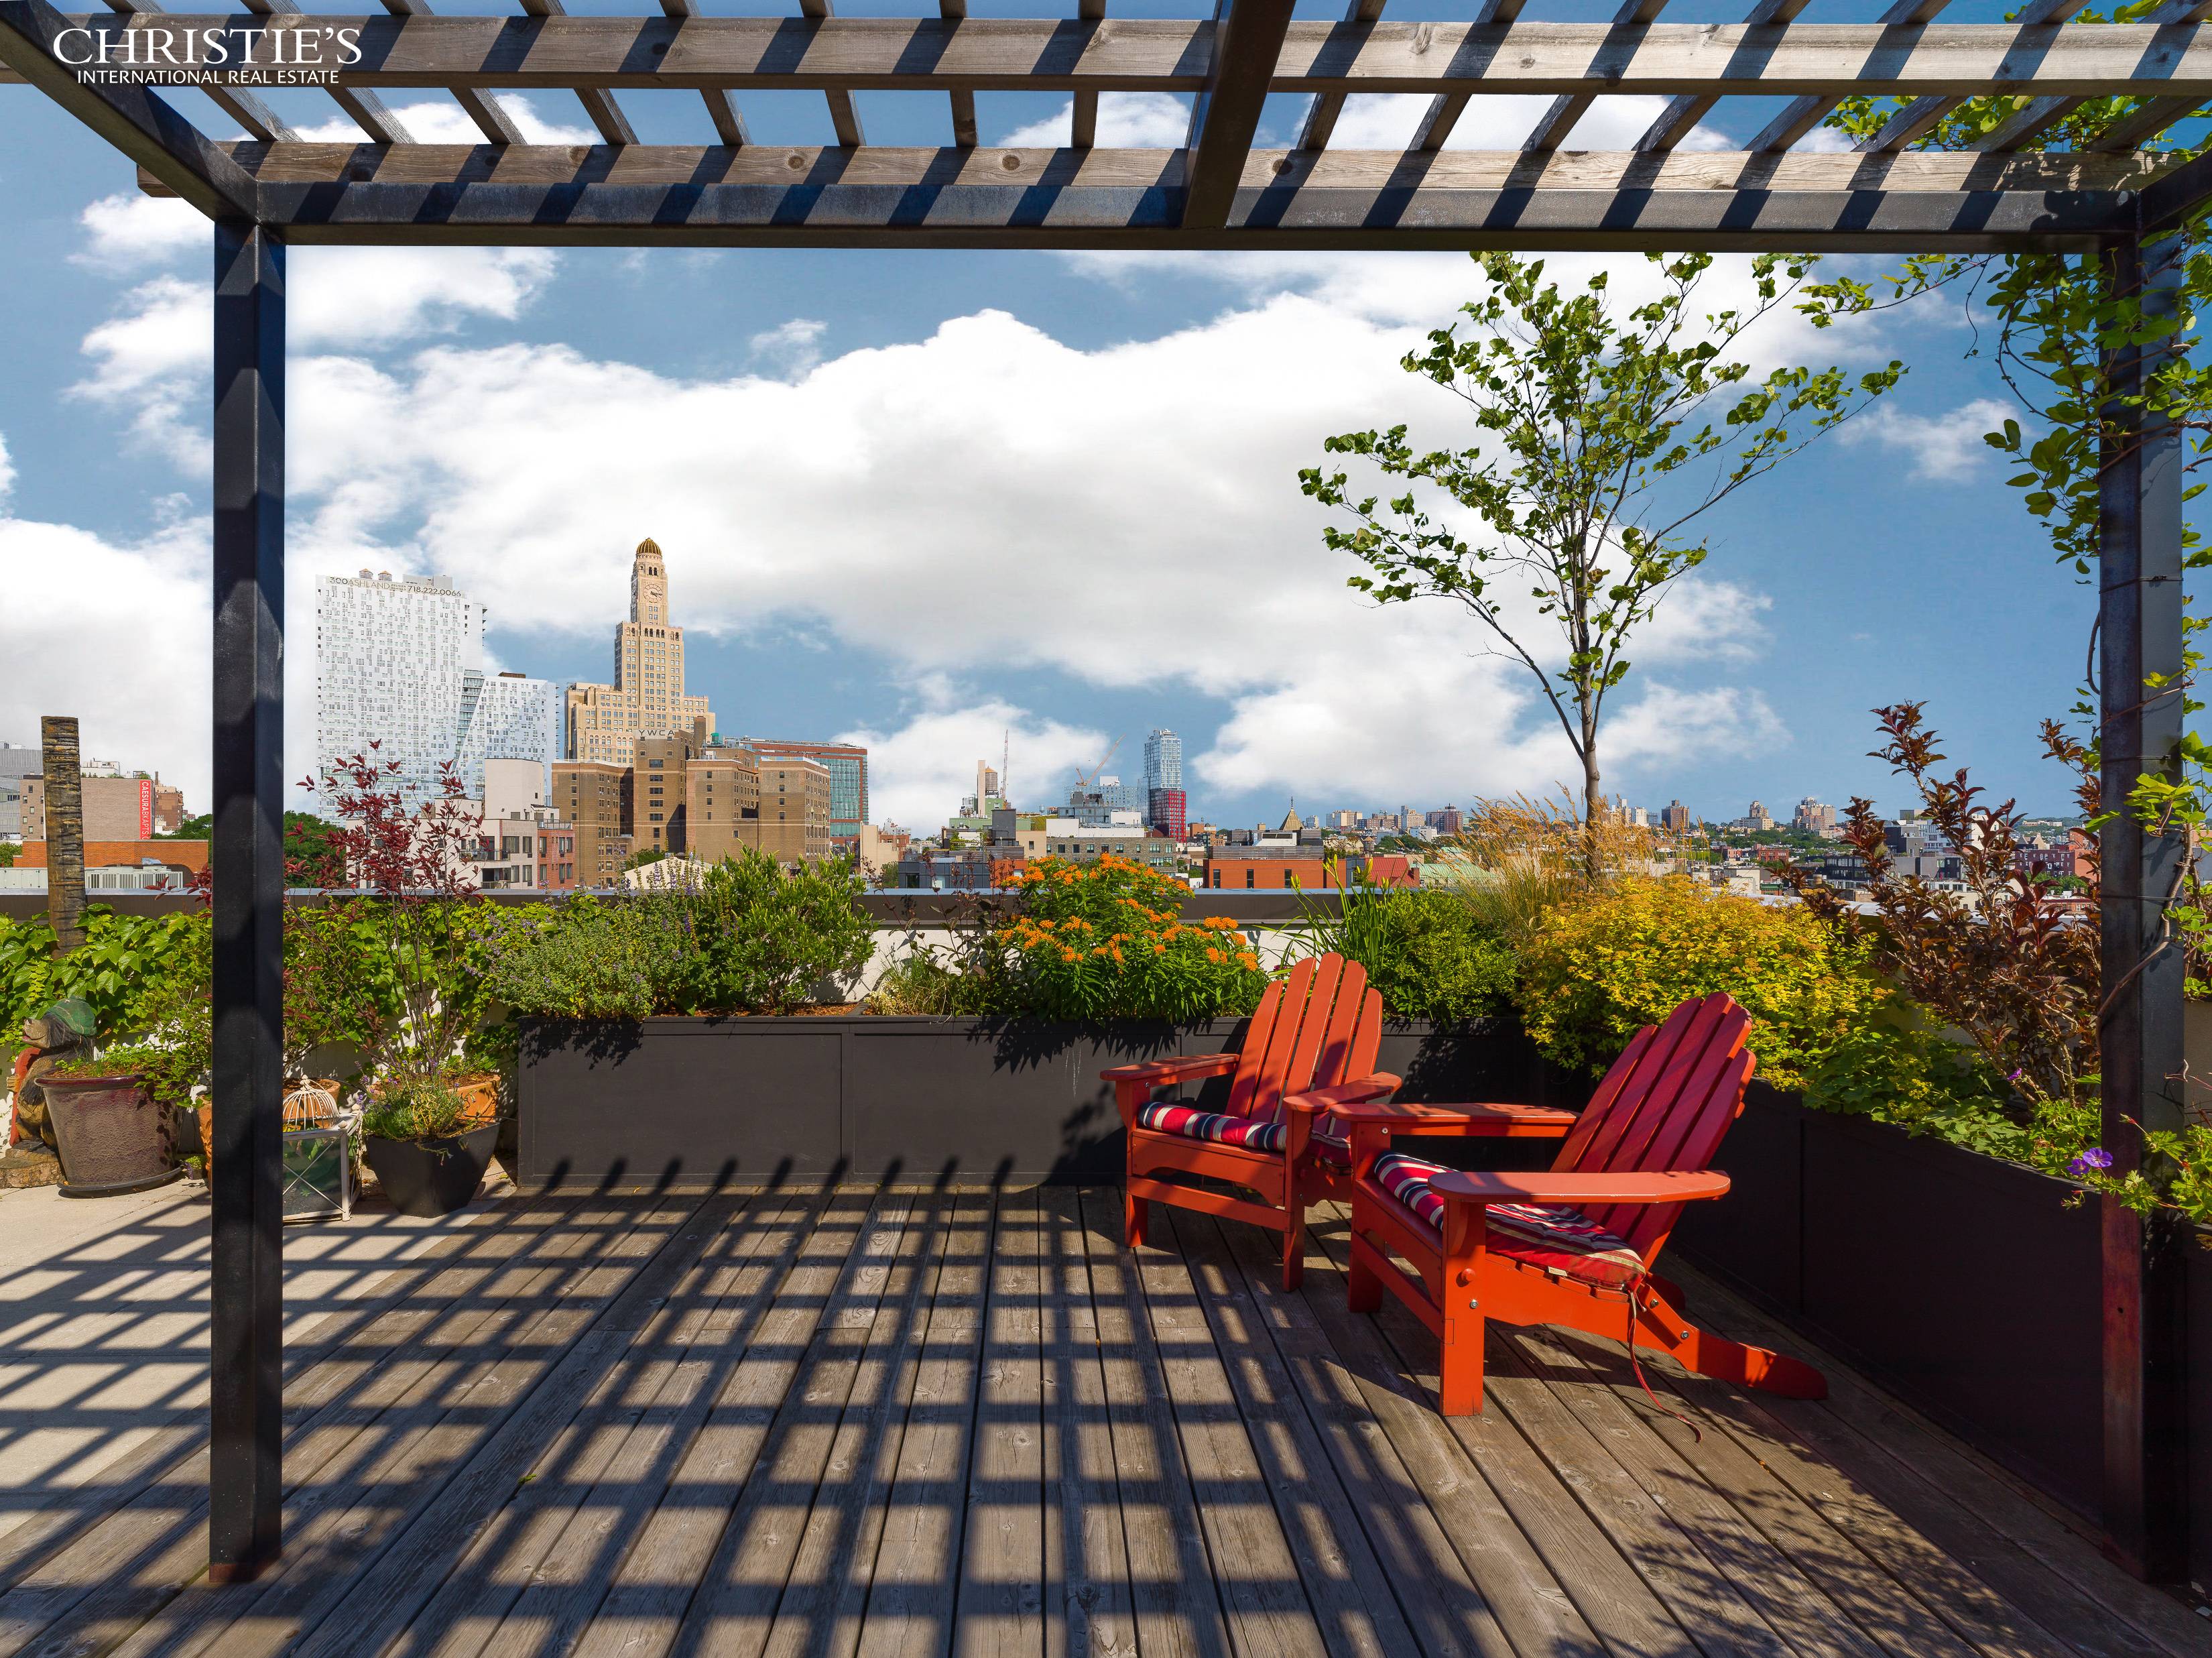 PRIVATE PENTHOUSE WITH LANDSCAPED ROOF DECK PH2 is an impeccable and stylish three bedroom penthouse loft featuring an exquisitely designed roof deck on the top floor of the very private, ...